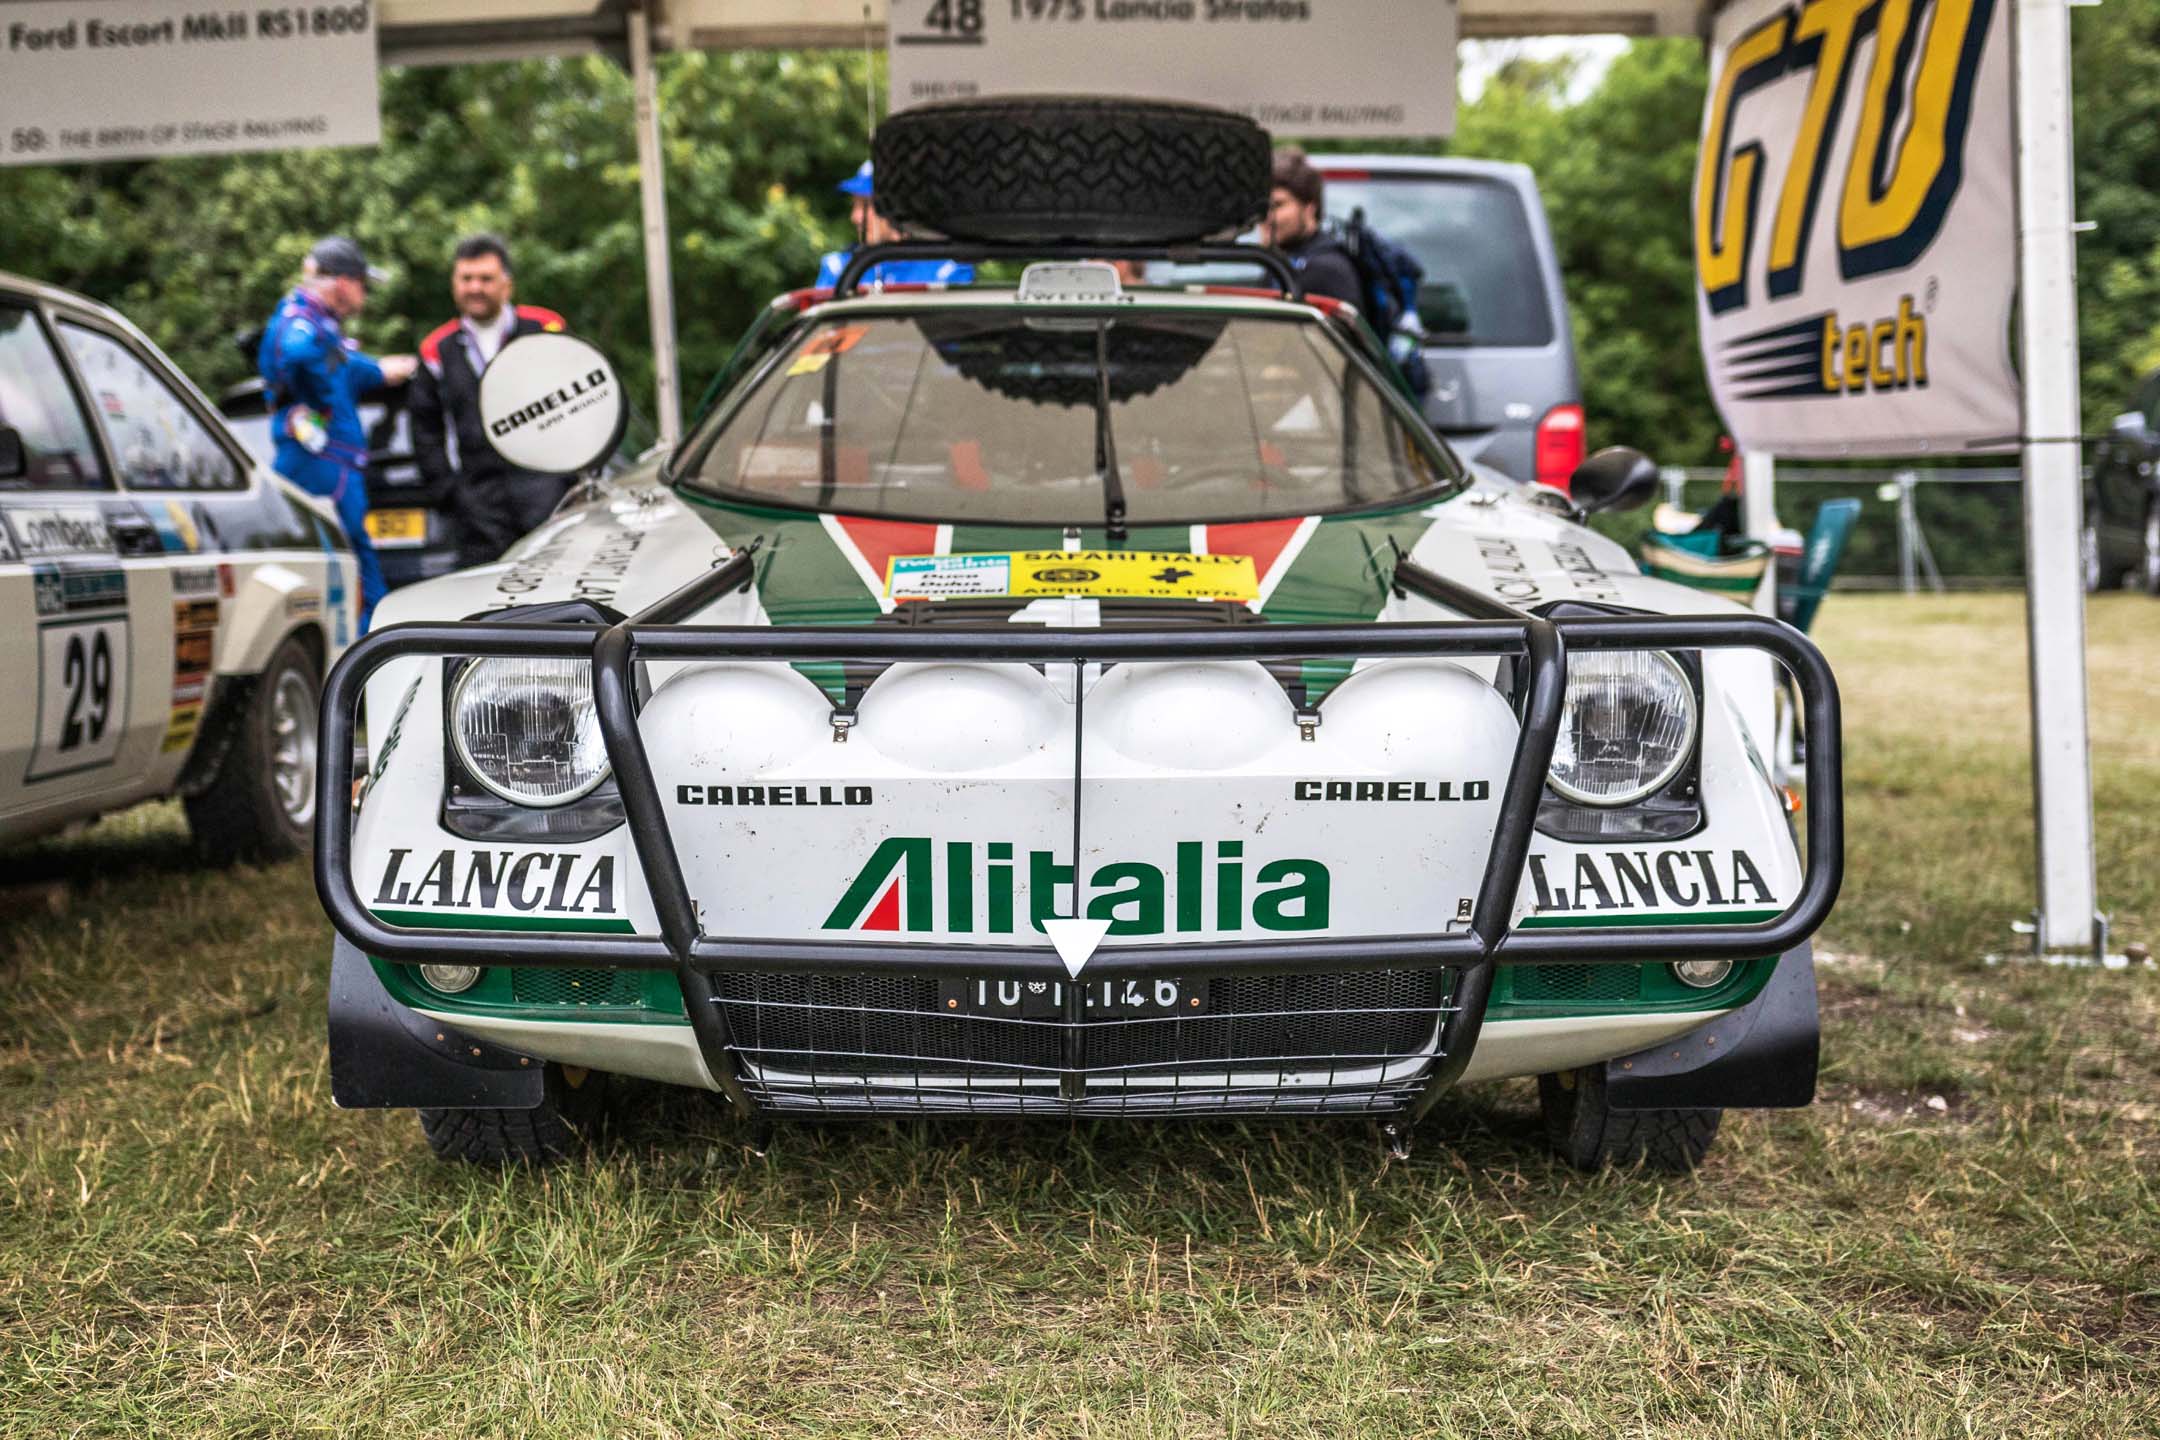 The Lancia Stratos is one of the most iconic rear-wheel-drive rally cars, and here appears in its best-known Alitalia livery. Having airplane markings on a car just makes sense, given how much time this little Lancia spends in the air.